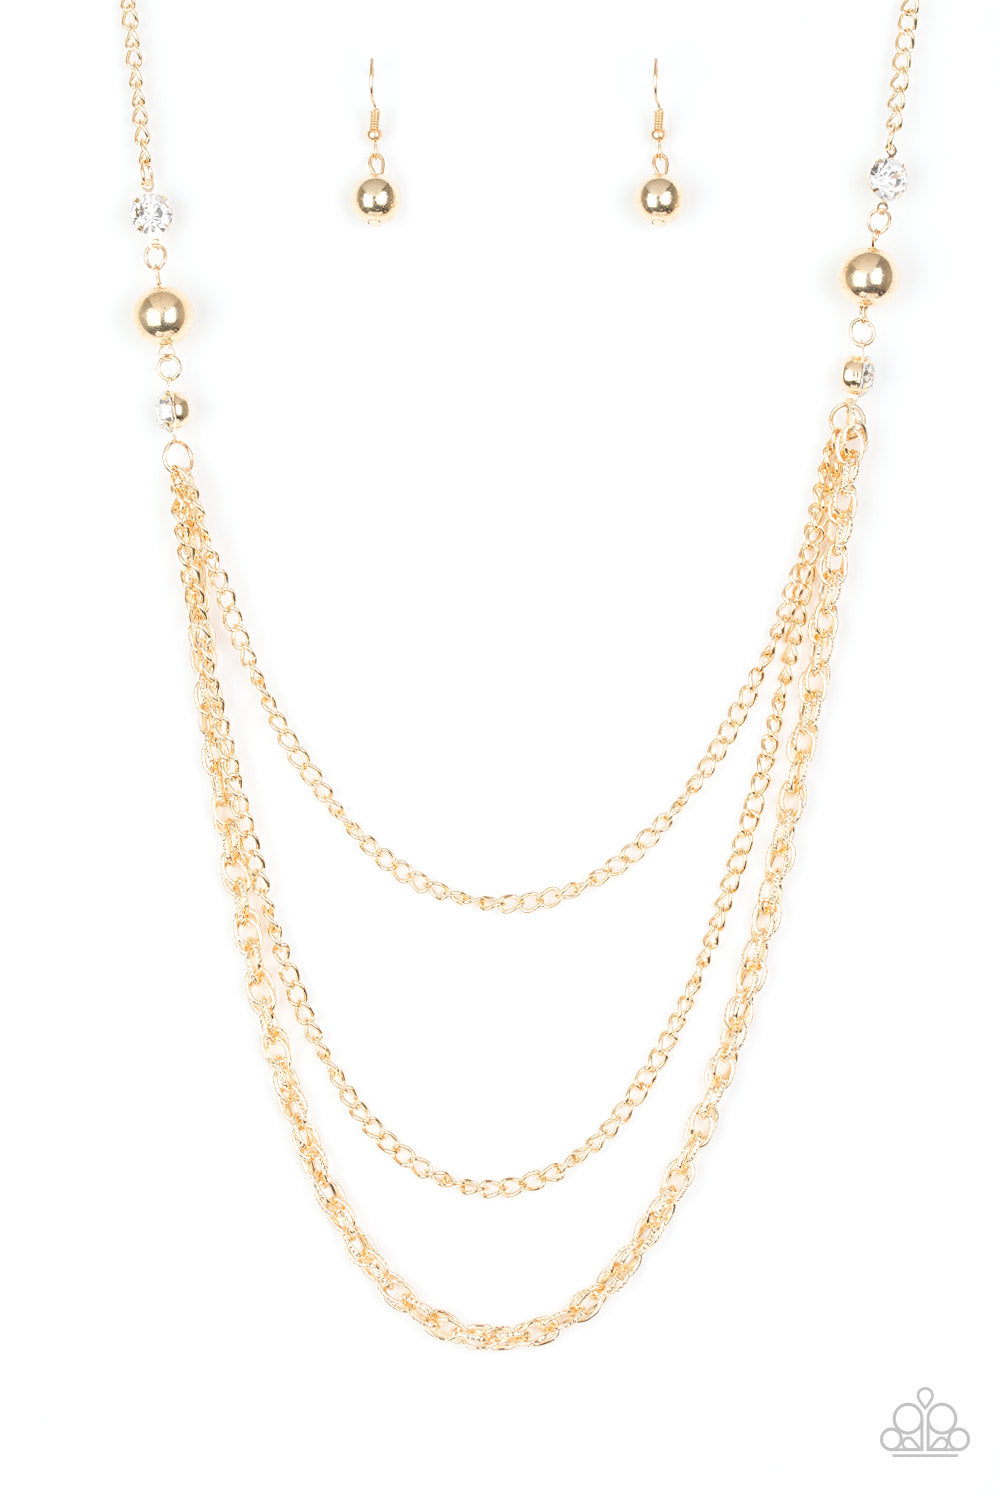 RITZ It All Necklace (Black, Brass, Gold, White)